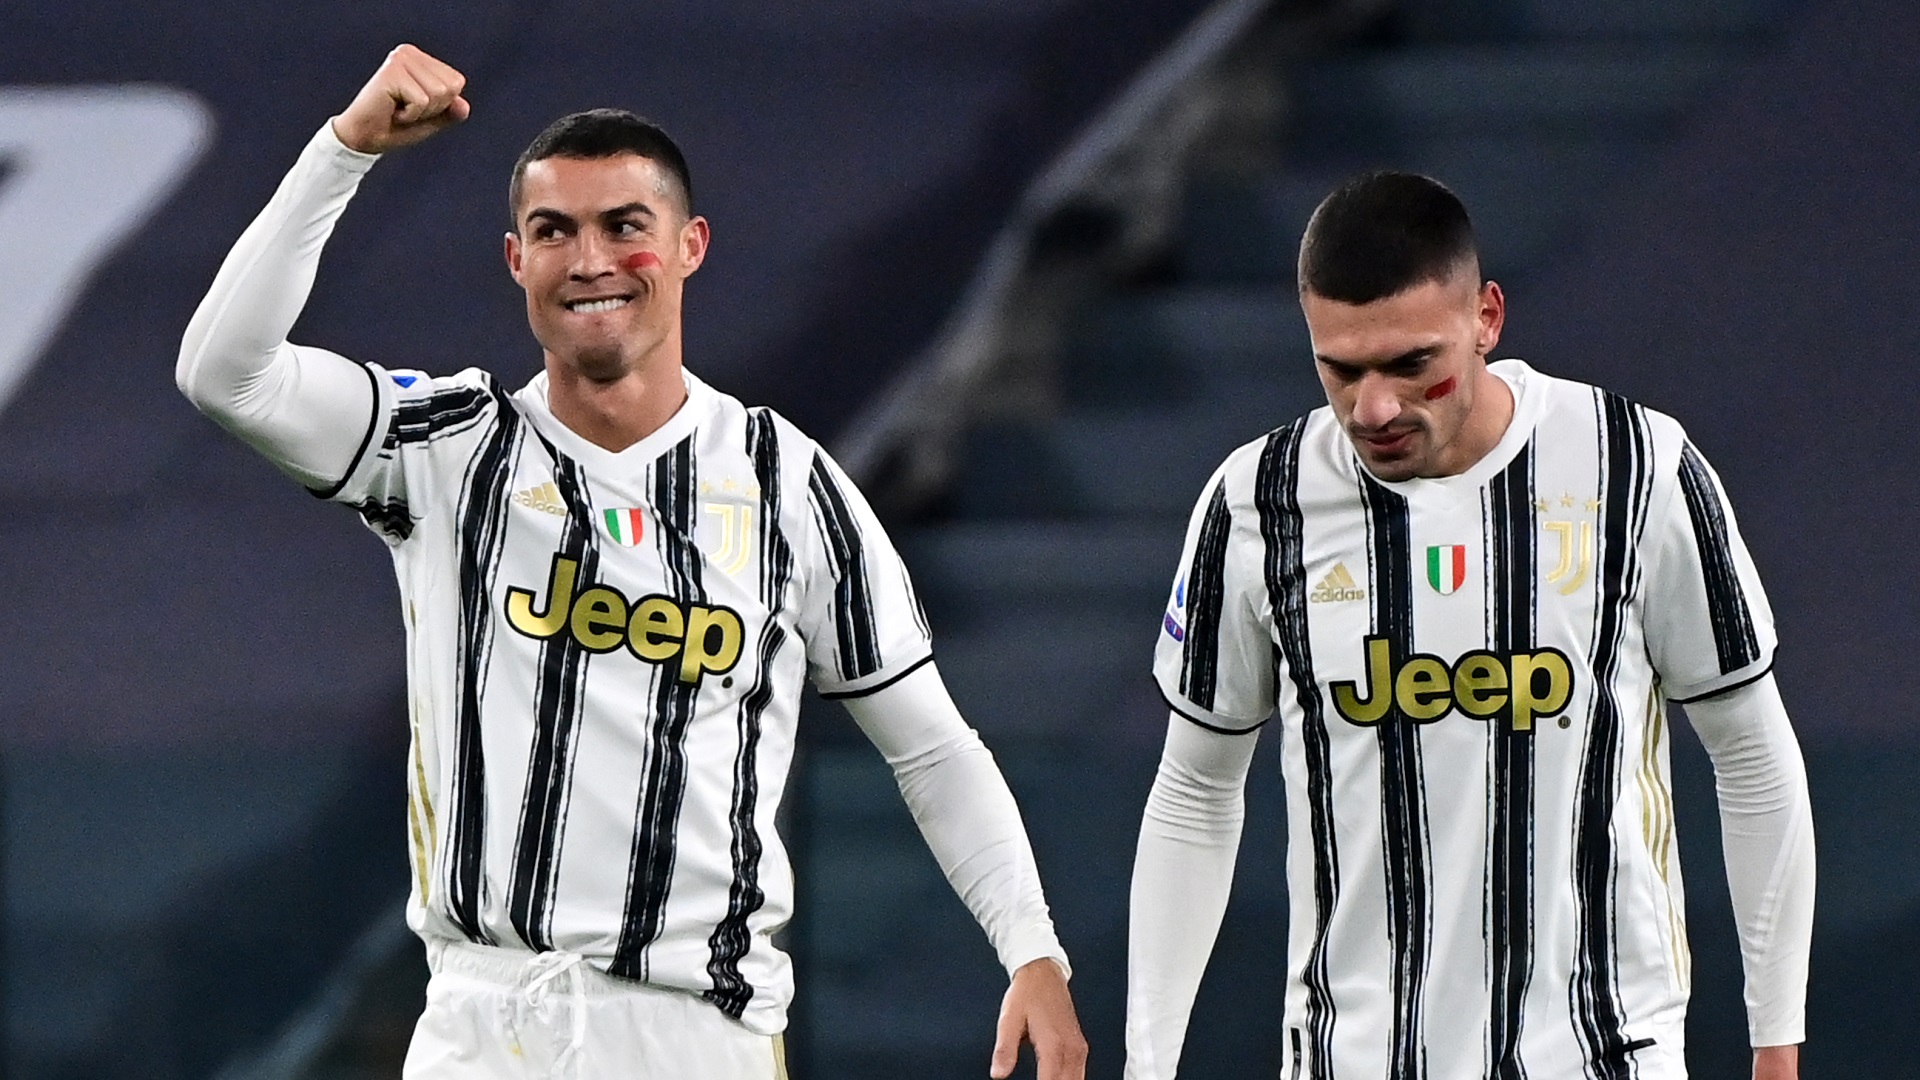 'Ronaldo sets the example for everyone' – Pirlo hails Juve forward after match-winning double